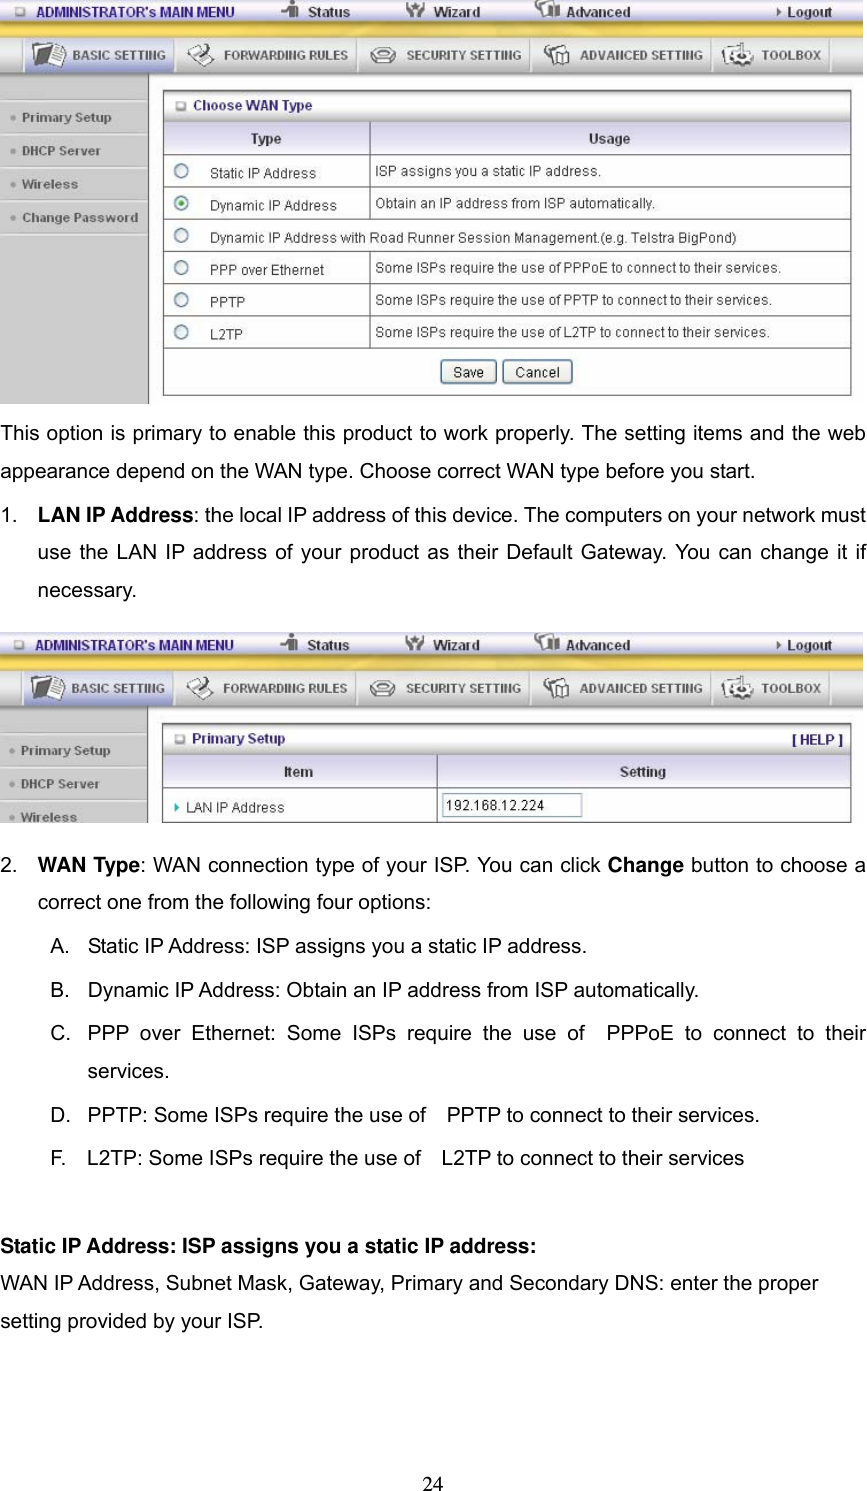  24 This option is primary to enable this product to work properly. The setting items and the web appearance depend on the WAN type. Choose correct WAN type before you start. 1.  LAN IP Address: the local IP address of this device. The computers on your network must use the LAN IP address of your product as their Default Gateway. You can change it if necessary.  2.  WAN Type: WAN connection type of your ISP. You can click Change button to choose a correct one from the following four options: A.  Static IP Address: ISP assigns you a static IP address. B.  Dynamic IP Address: Obtain an IP address from ISP automatically. C.  PPP over Ethernet: Some ISPs require the use of  PPPoE to connect to their services. D.  PPTP: Some ISPs require the use of    PPTP to connect to their services. F.    L2TP: Some ISPs require the use of    L2TP to connect to their services  Static IP Address: ISP assigns you a static IP address: WAN IP Address, Subnet Mask, Gateway, Primary and Secondary DNS: enter the proper setting provided by your ISP. 